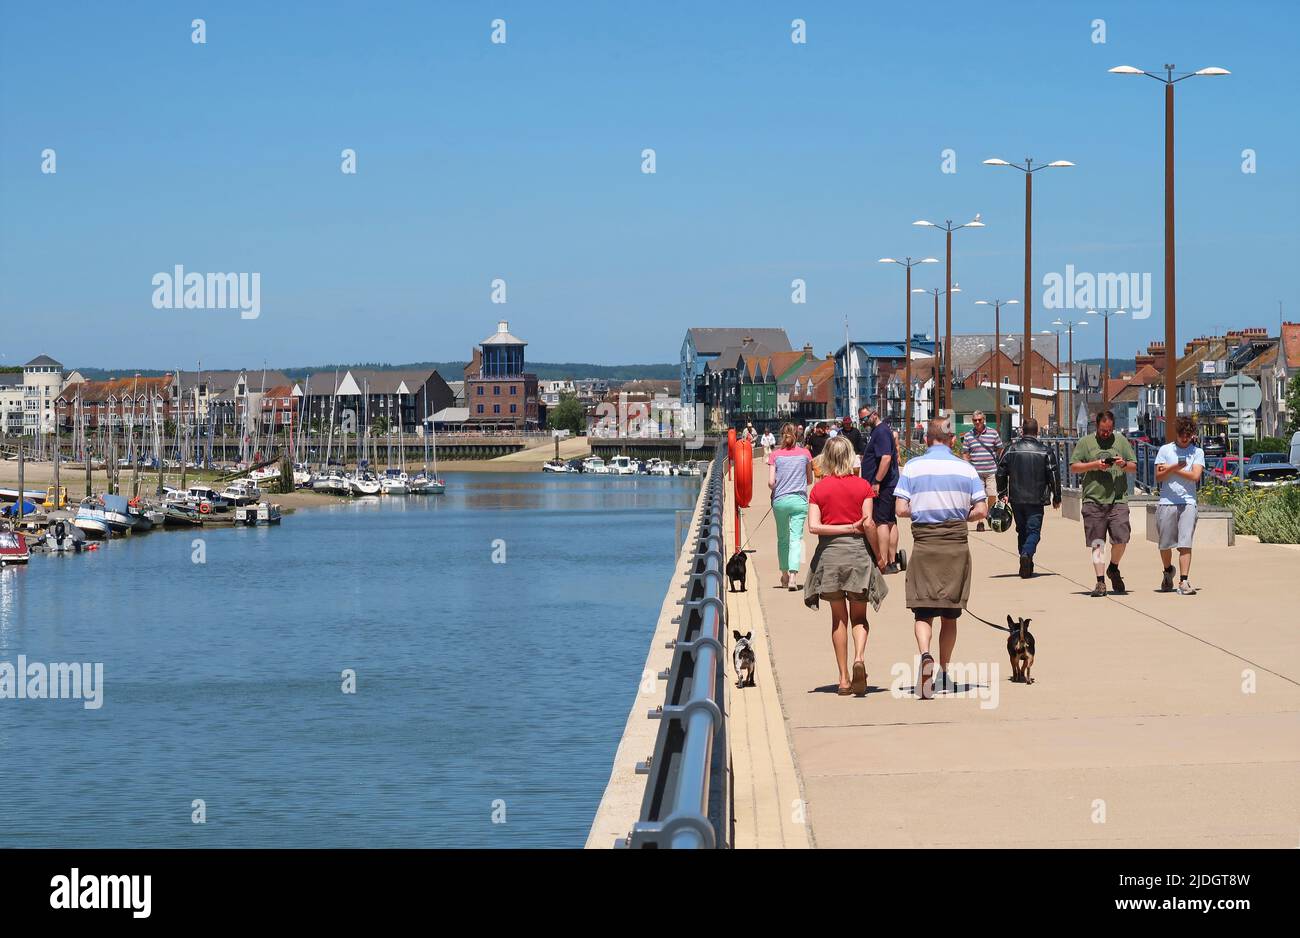 Littlehampton, West Sussex, UK. People walk along the riverside fottpath on the East bank of the River Arun. Shows town centre and yachts beyond. Stock Photo